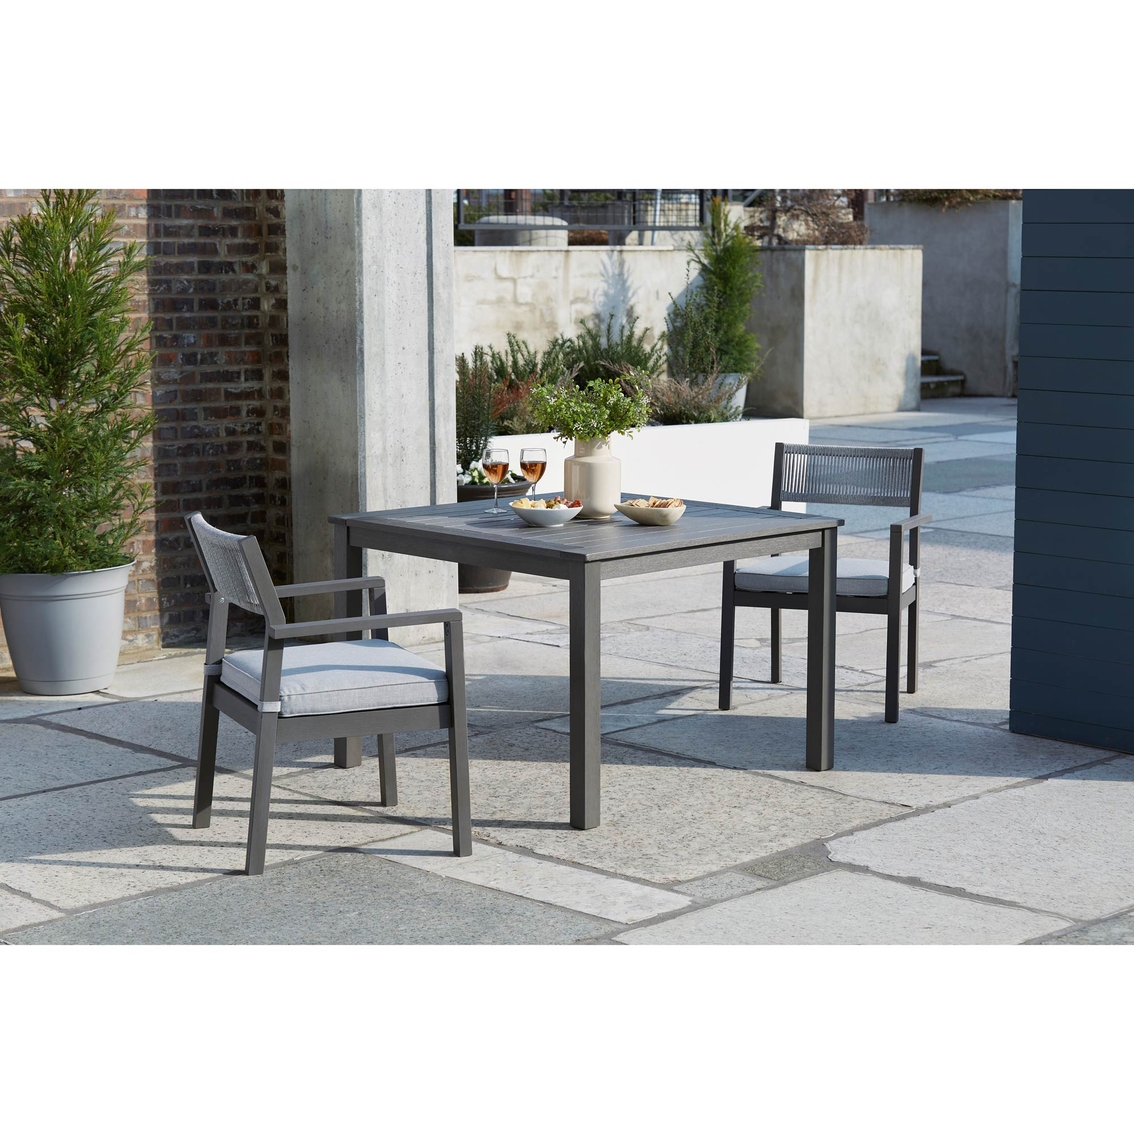 Signature Design by Ashley Eden Town Outdoor Dining Table - Image 5 of 5